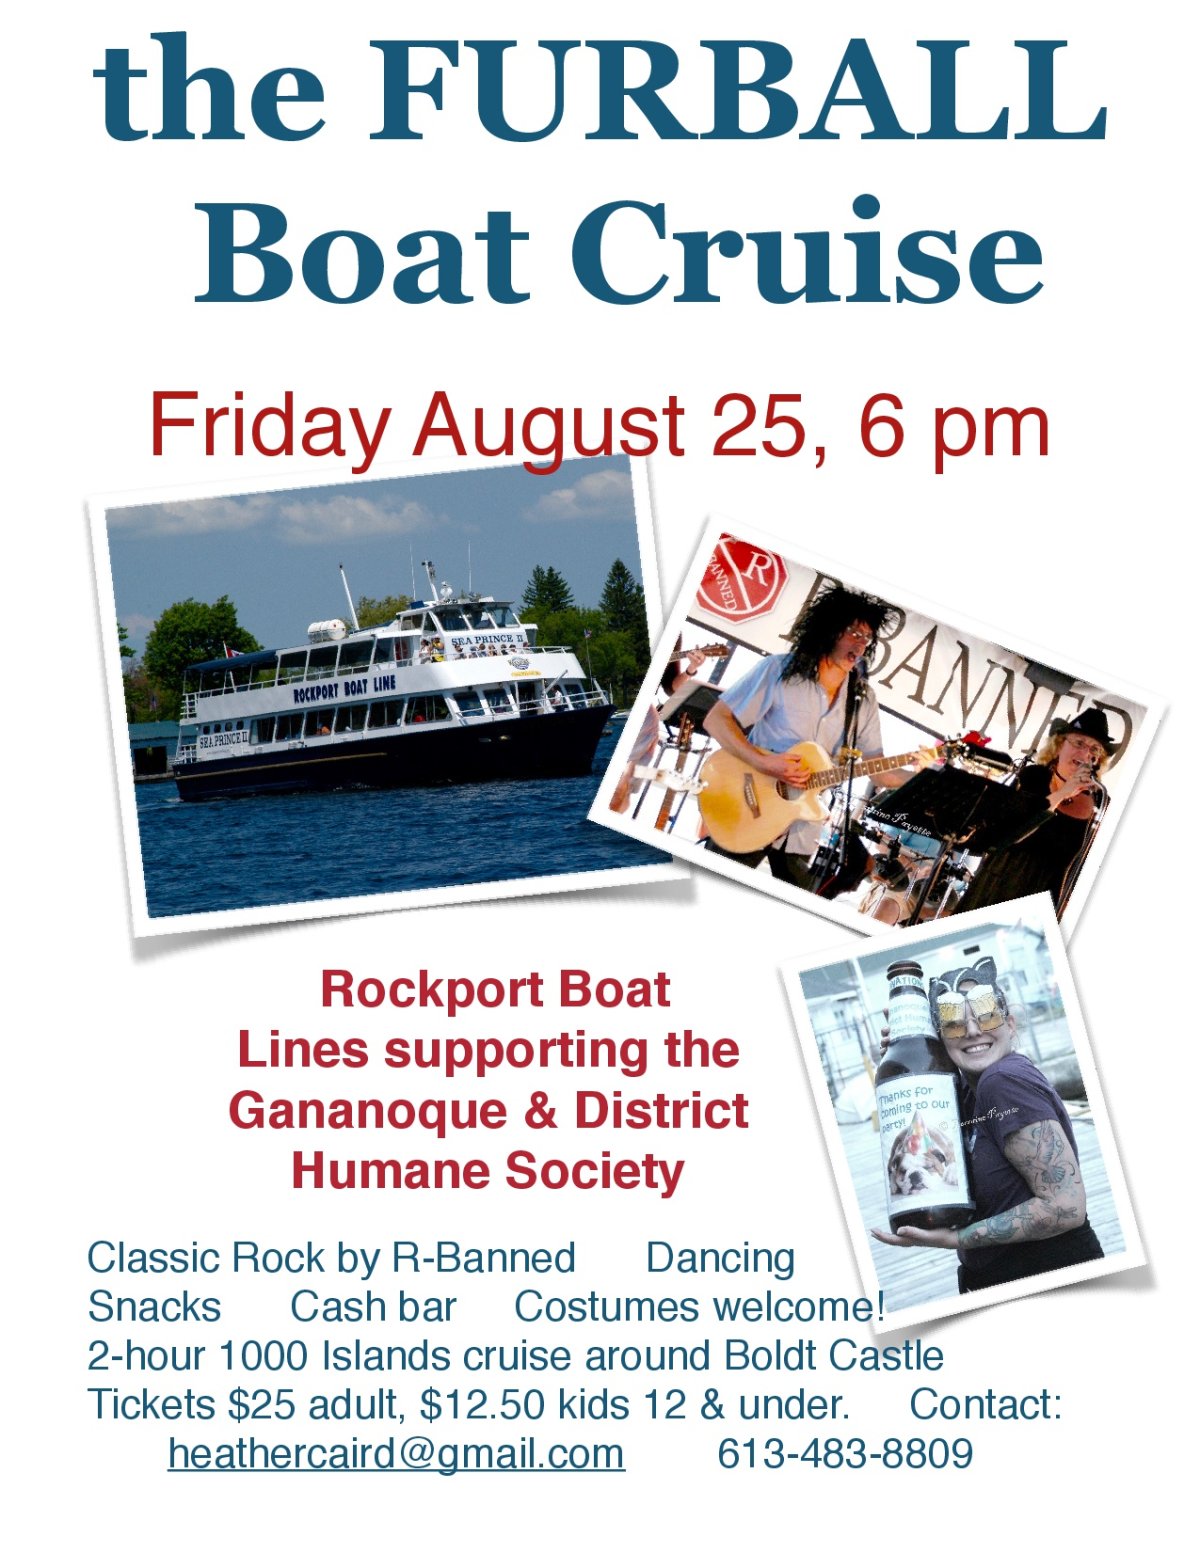 The Furball St. Lawrence River Cruise for the Gananoque & District Humane Society - image